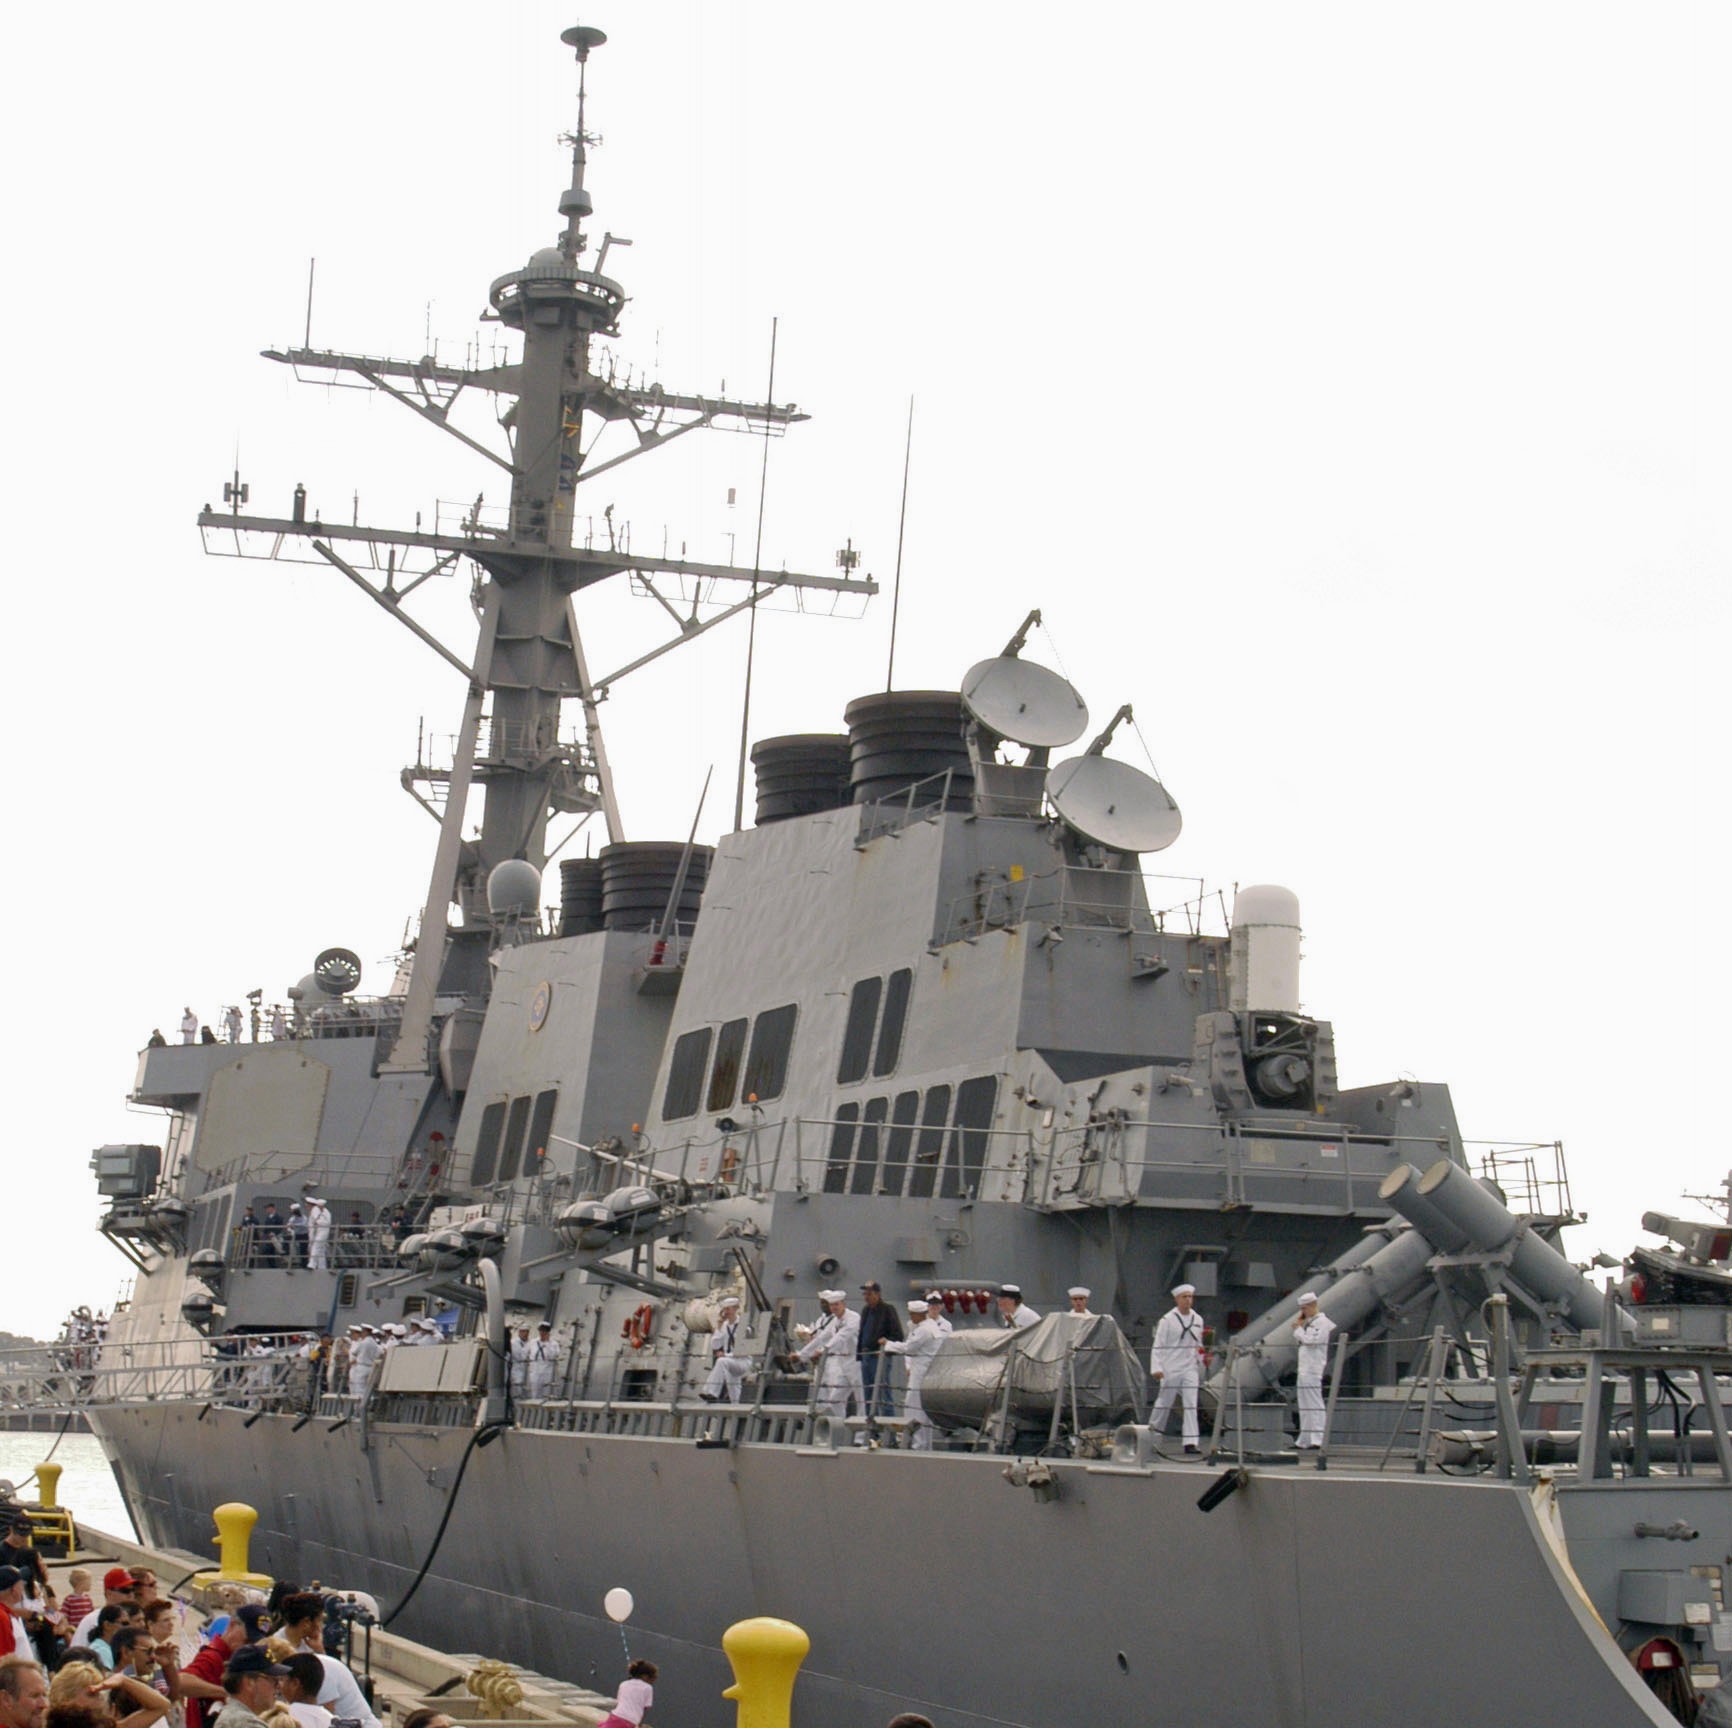 ddg-73 uss decatur guided missile destroyer arleigh burke class aegis bmd 48